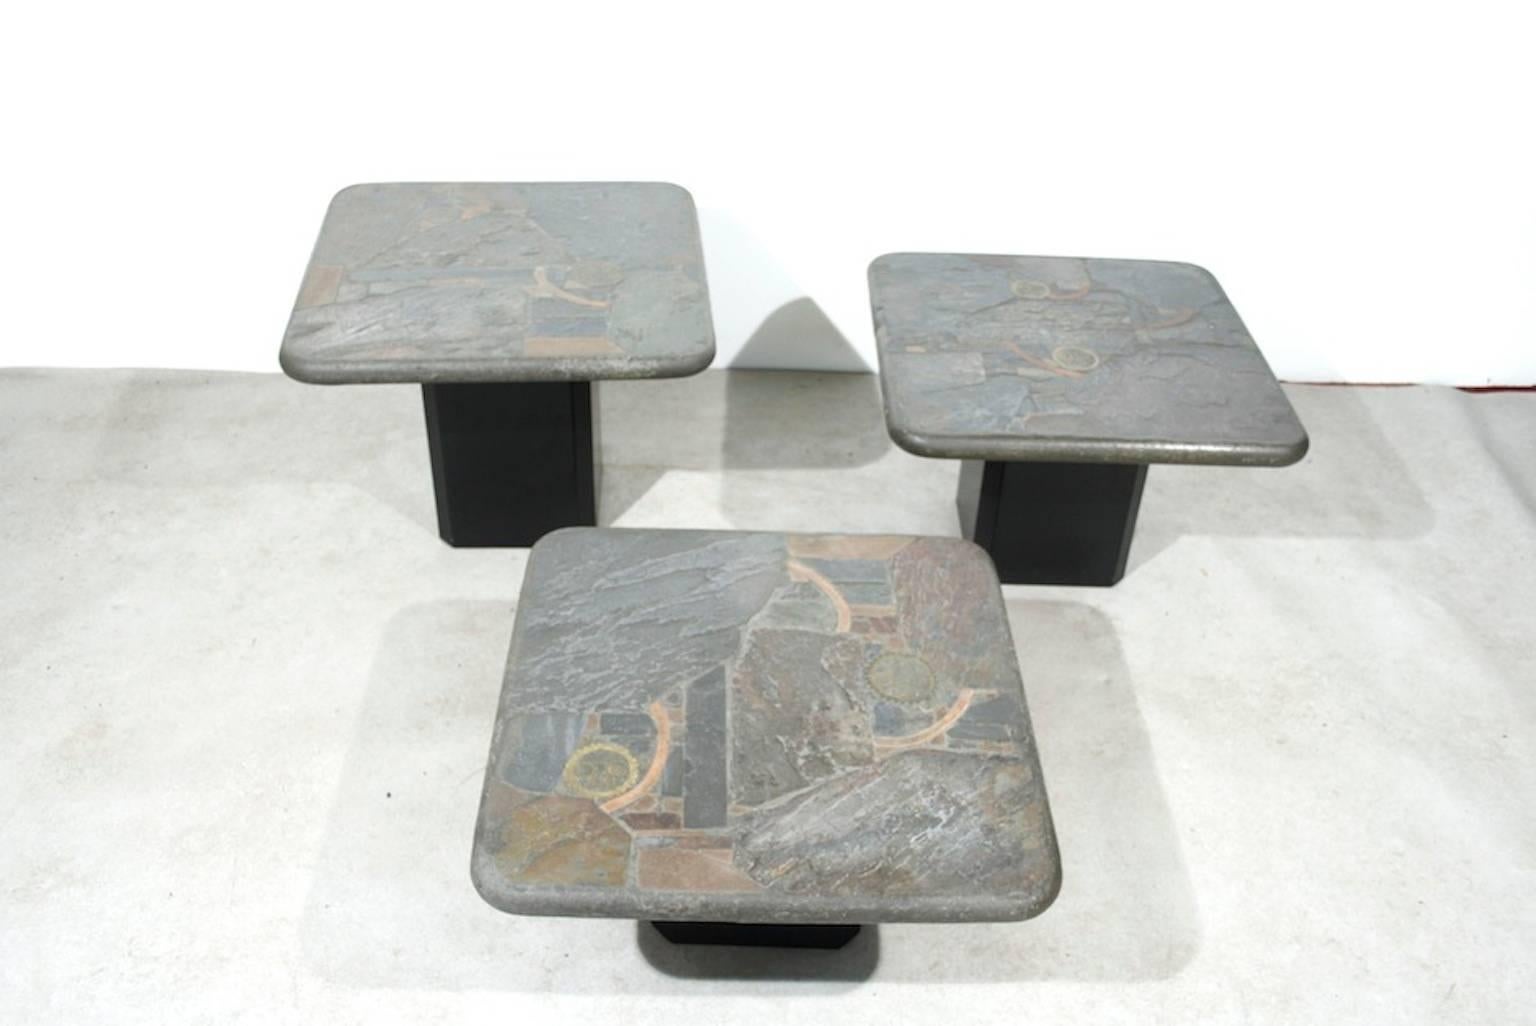 Trio of Marcus Kingma Brutalist Stone Coffee Tables, Dutch Design, 1970s In Good Condition For Sale In Lijnden, Noord-Holland